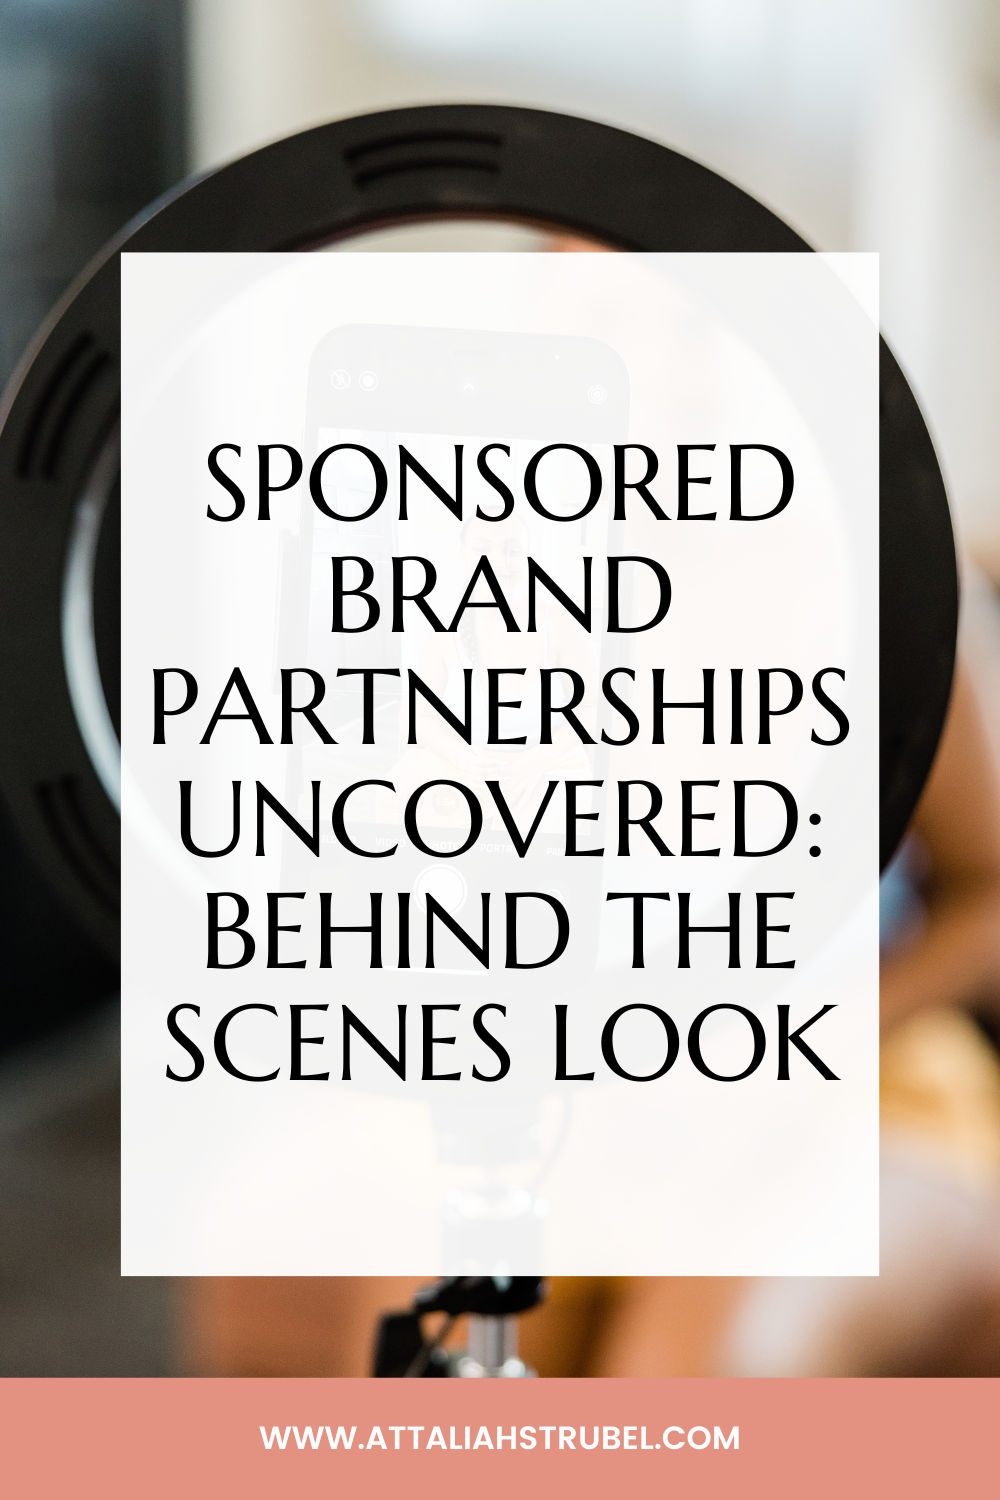 Brand partnerships uncovered